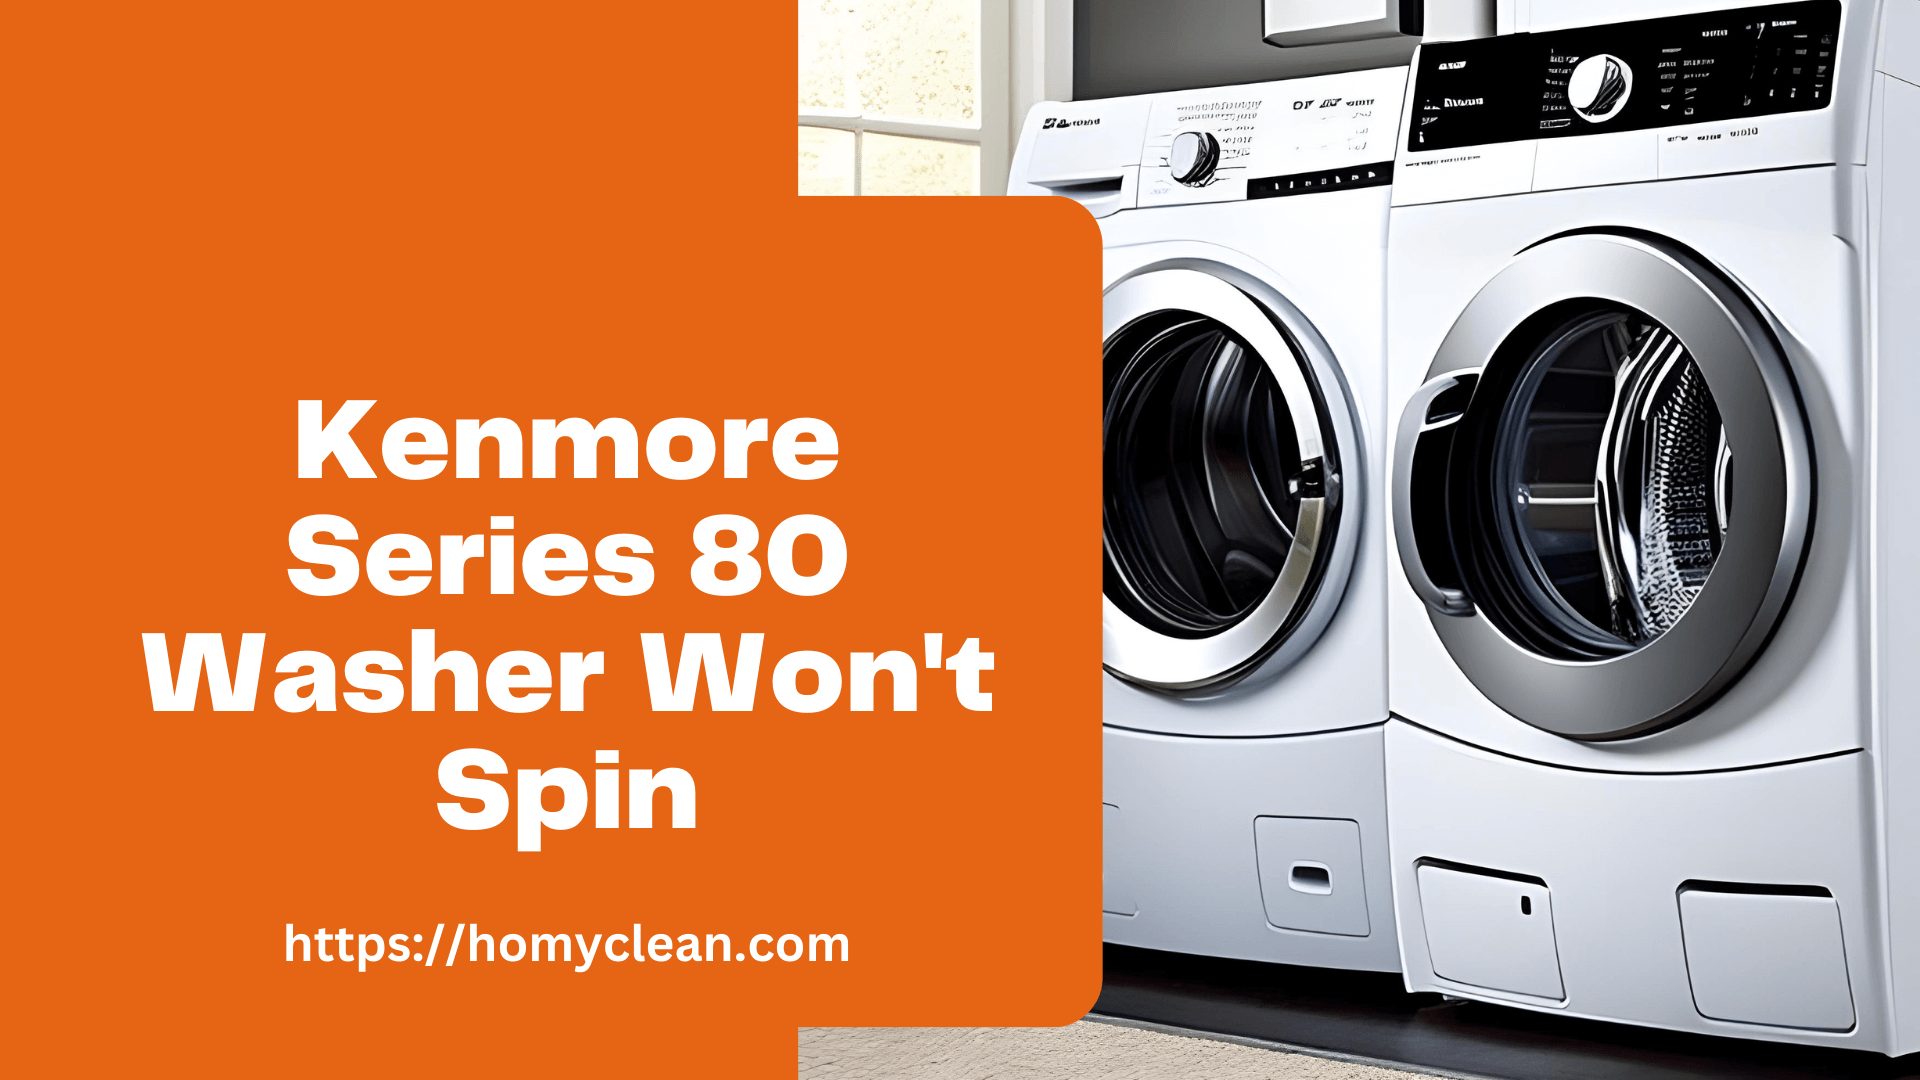 Kenmore Series 80 Washer Won’t Spin: Troubleshooting Guide and Solutions